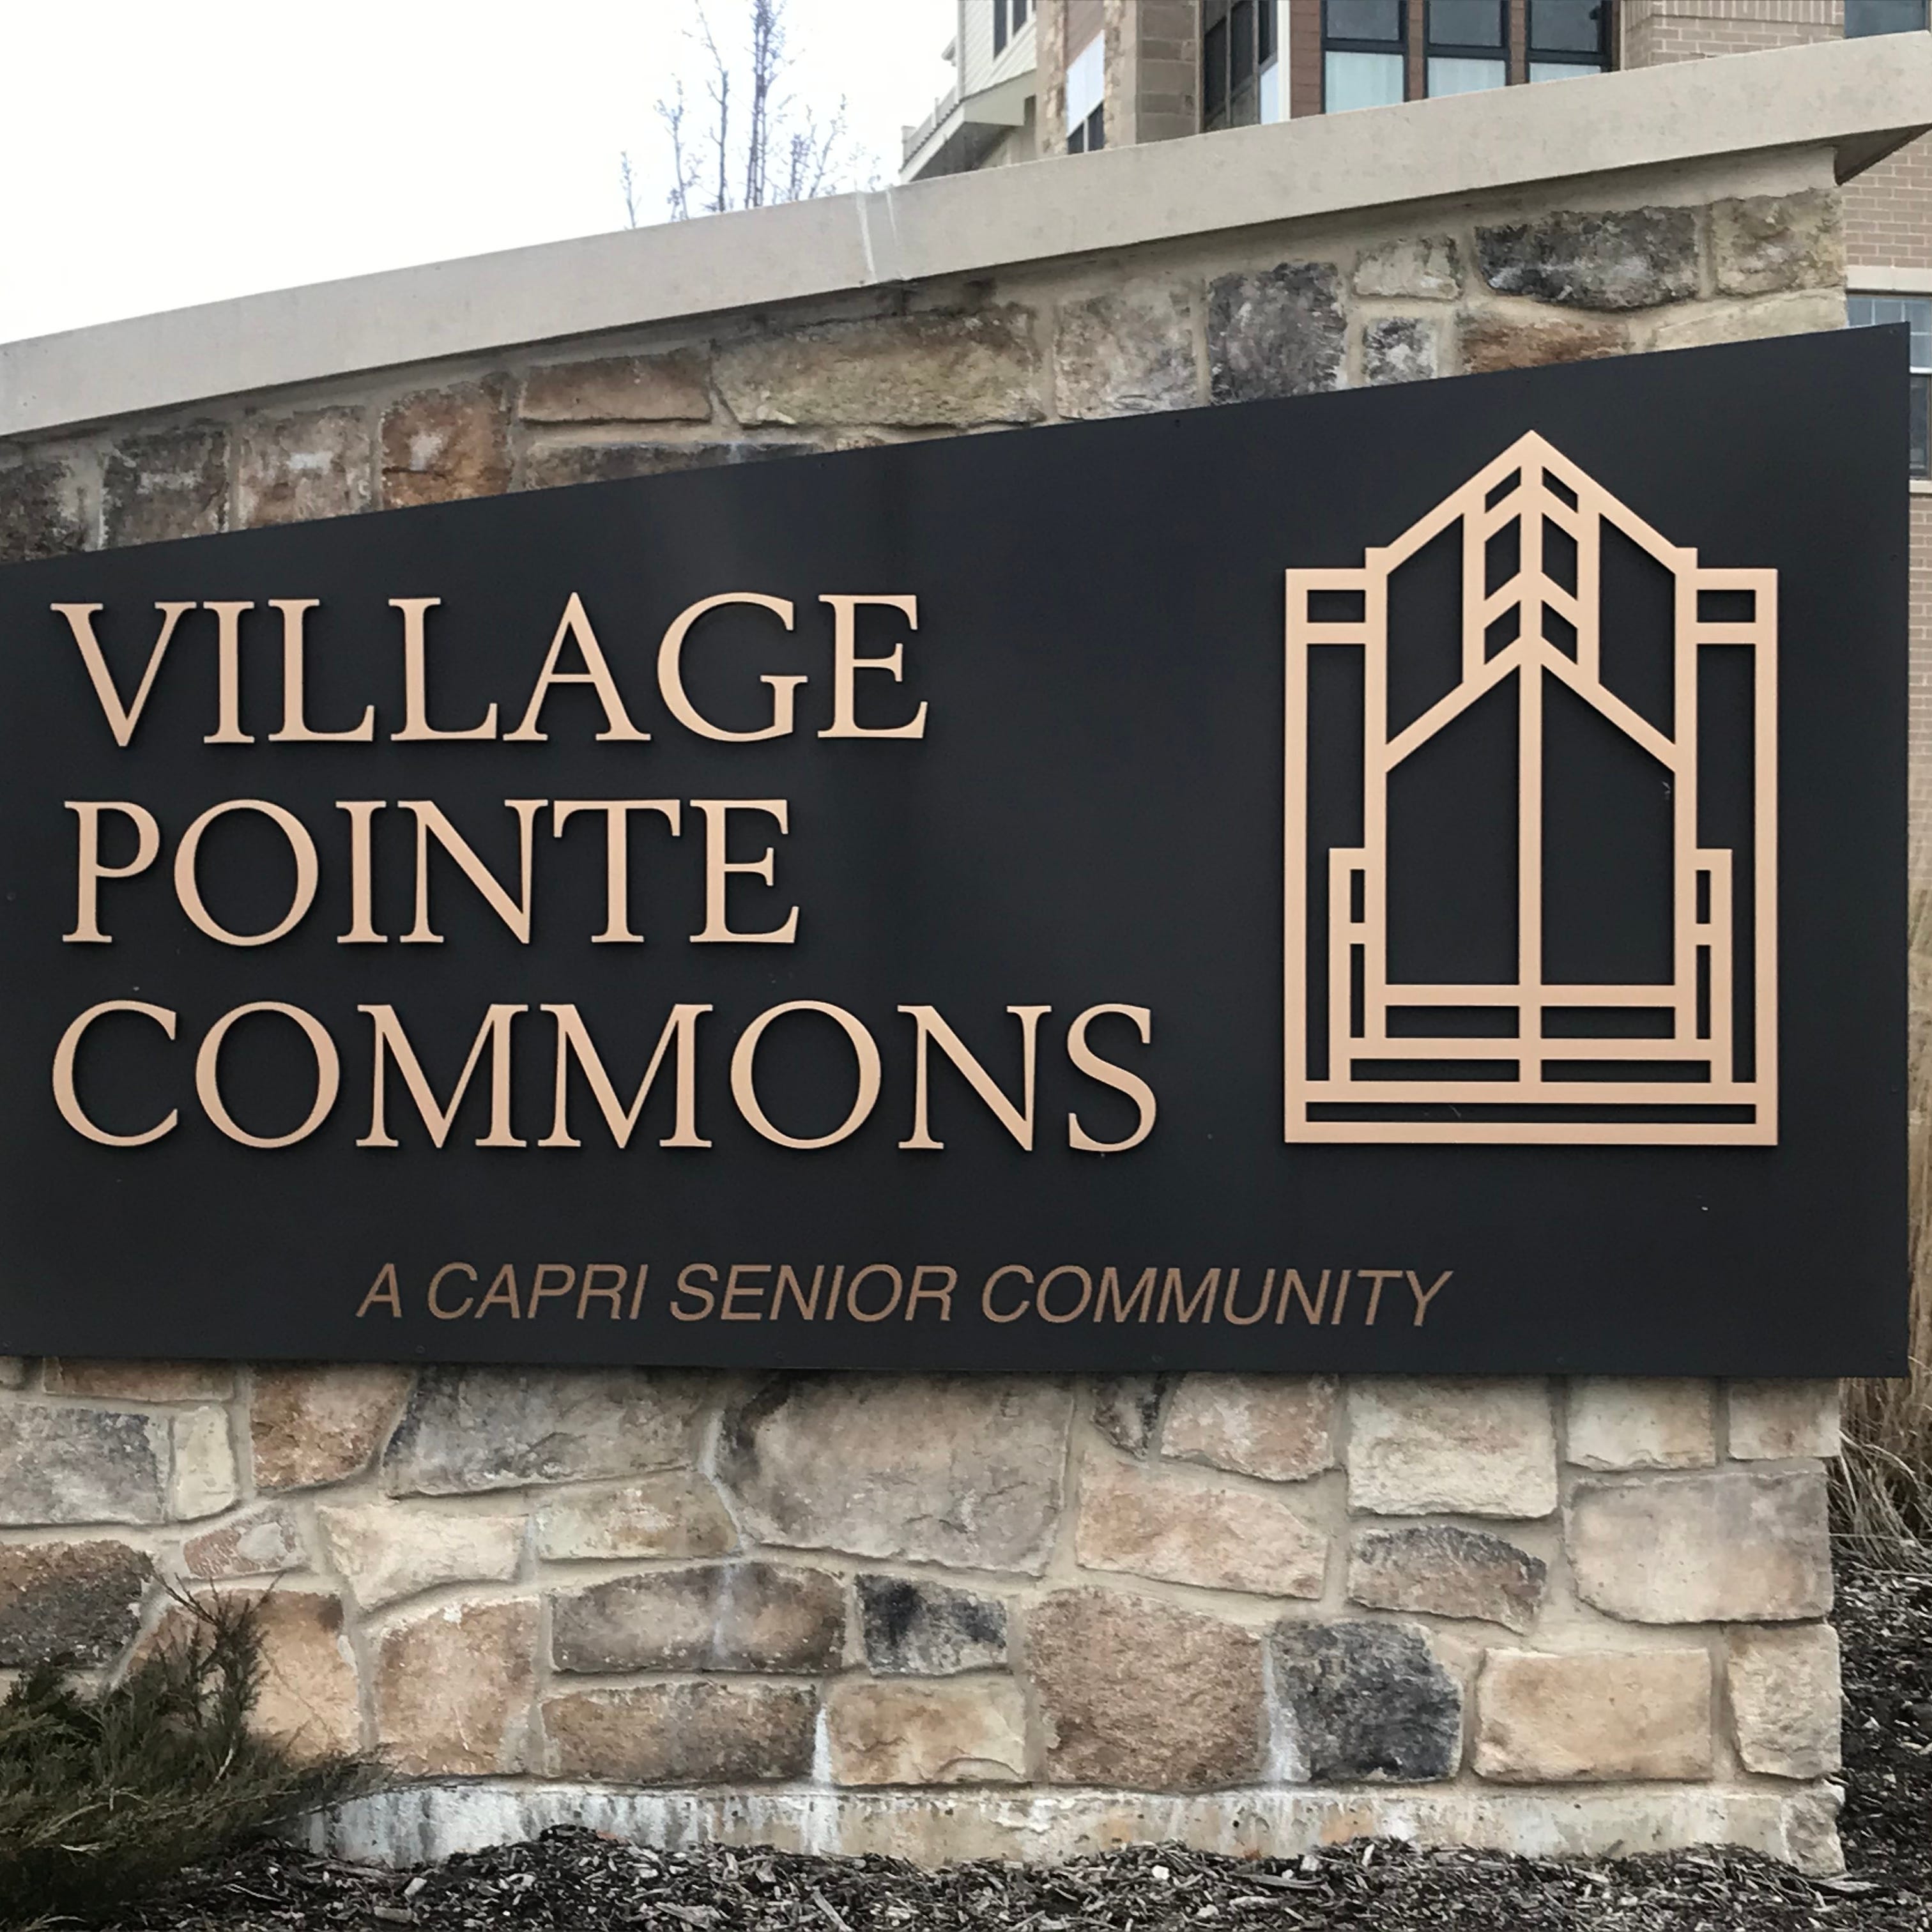 Health officials say 22 people have tested positive for coronavirus at Village Pointe Commons in Grafton.